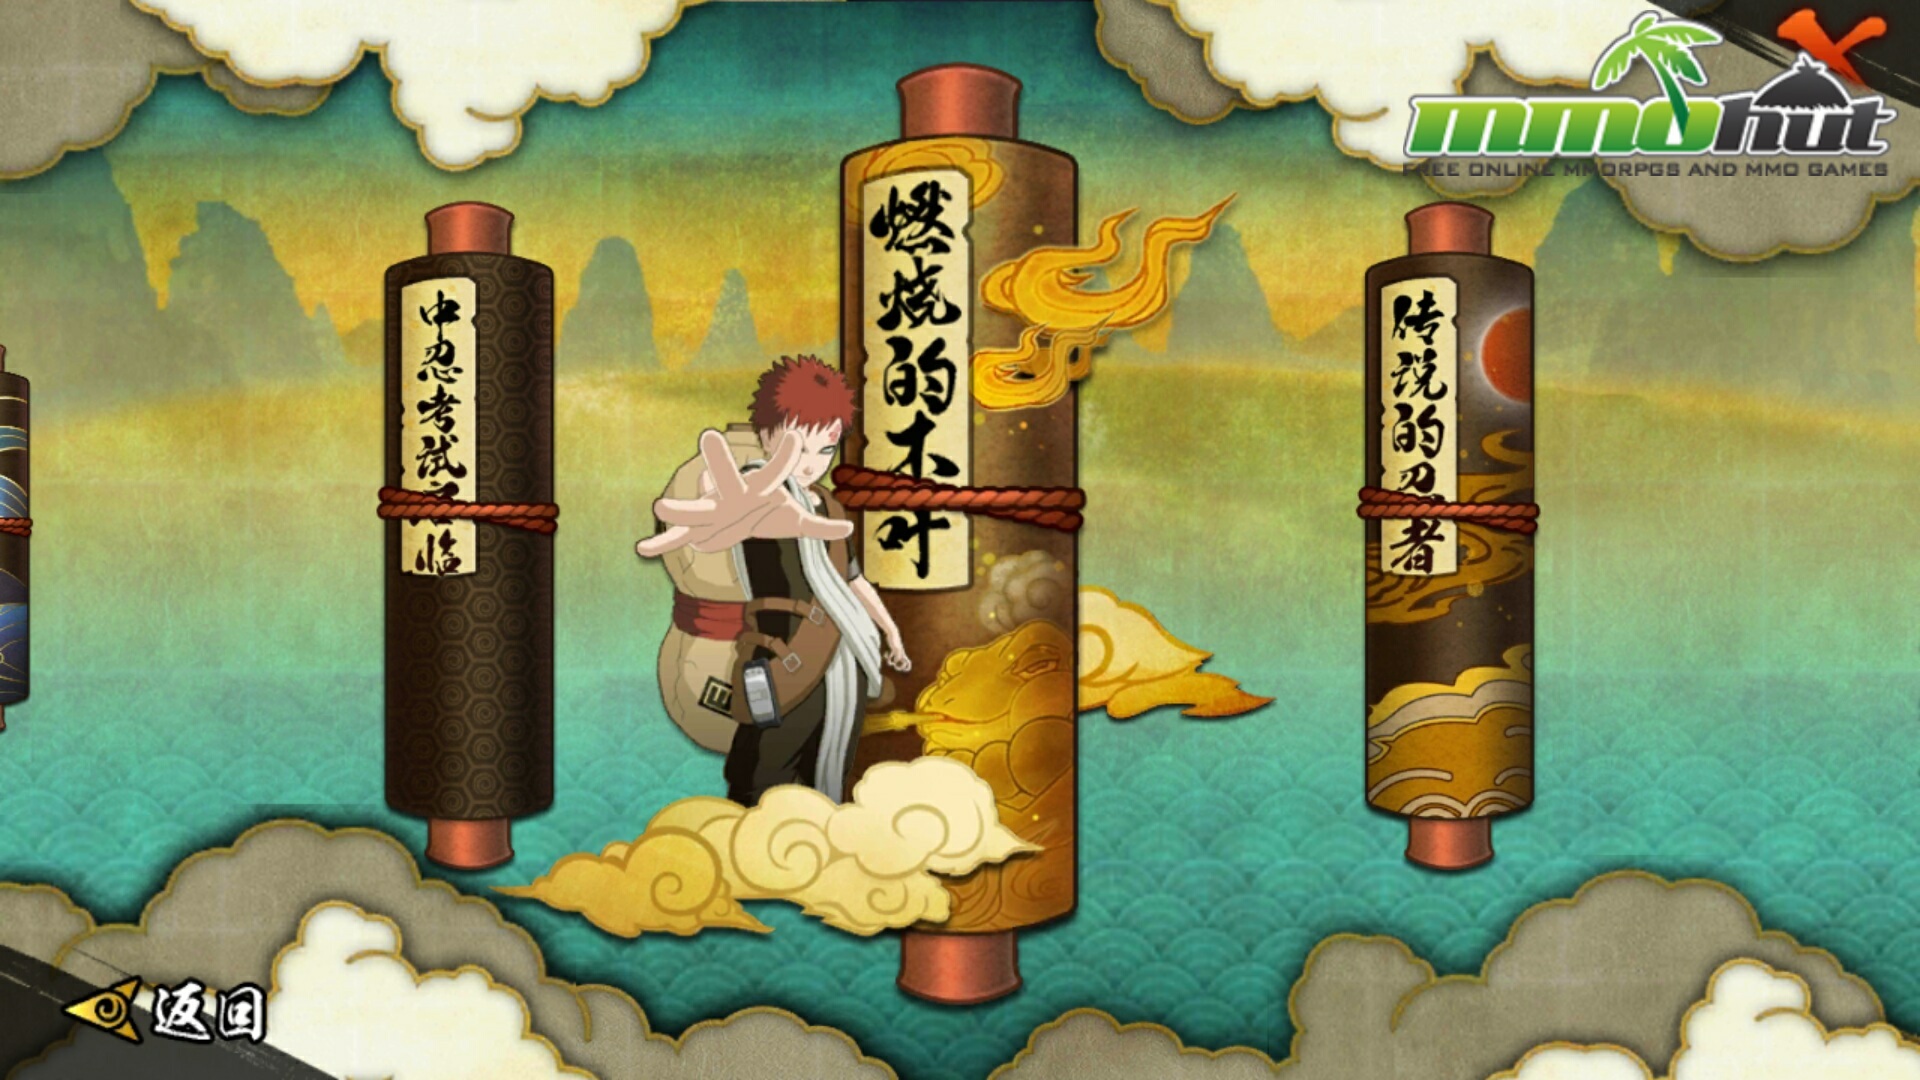 Naruto Mobile - Debut test phase begins in China next month - MMO